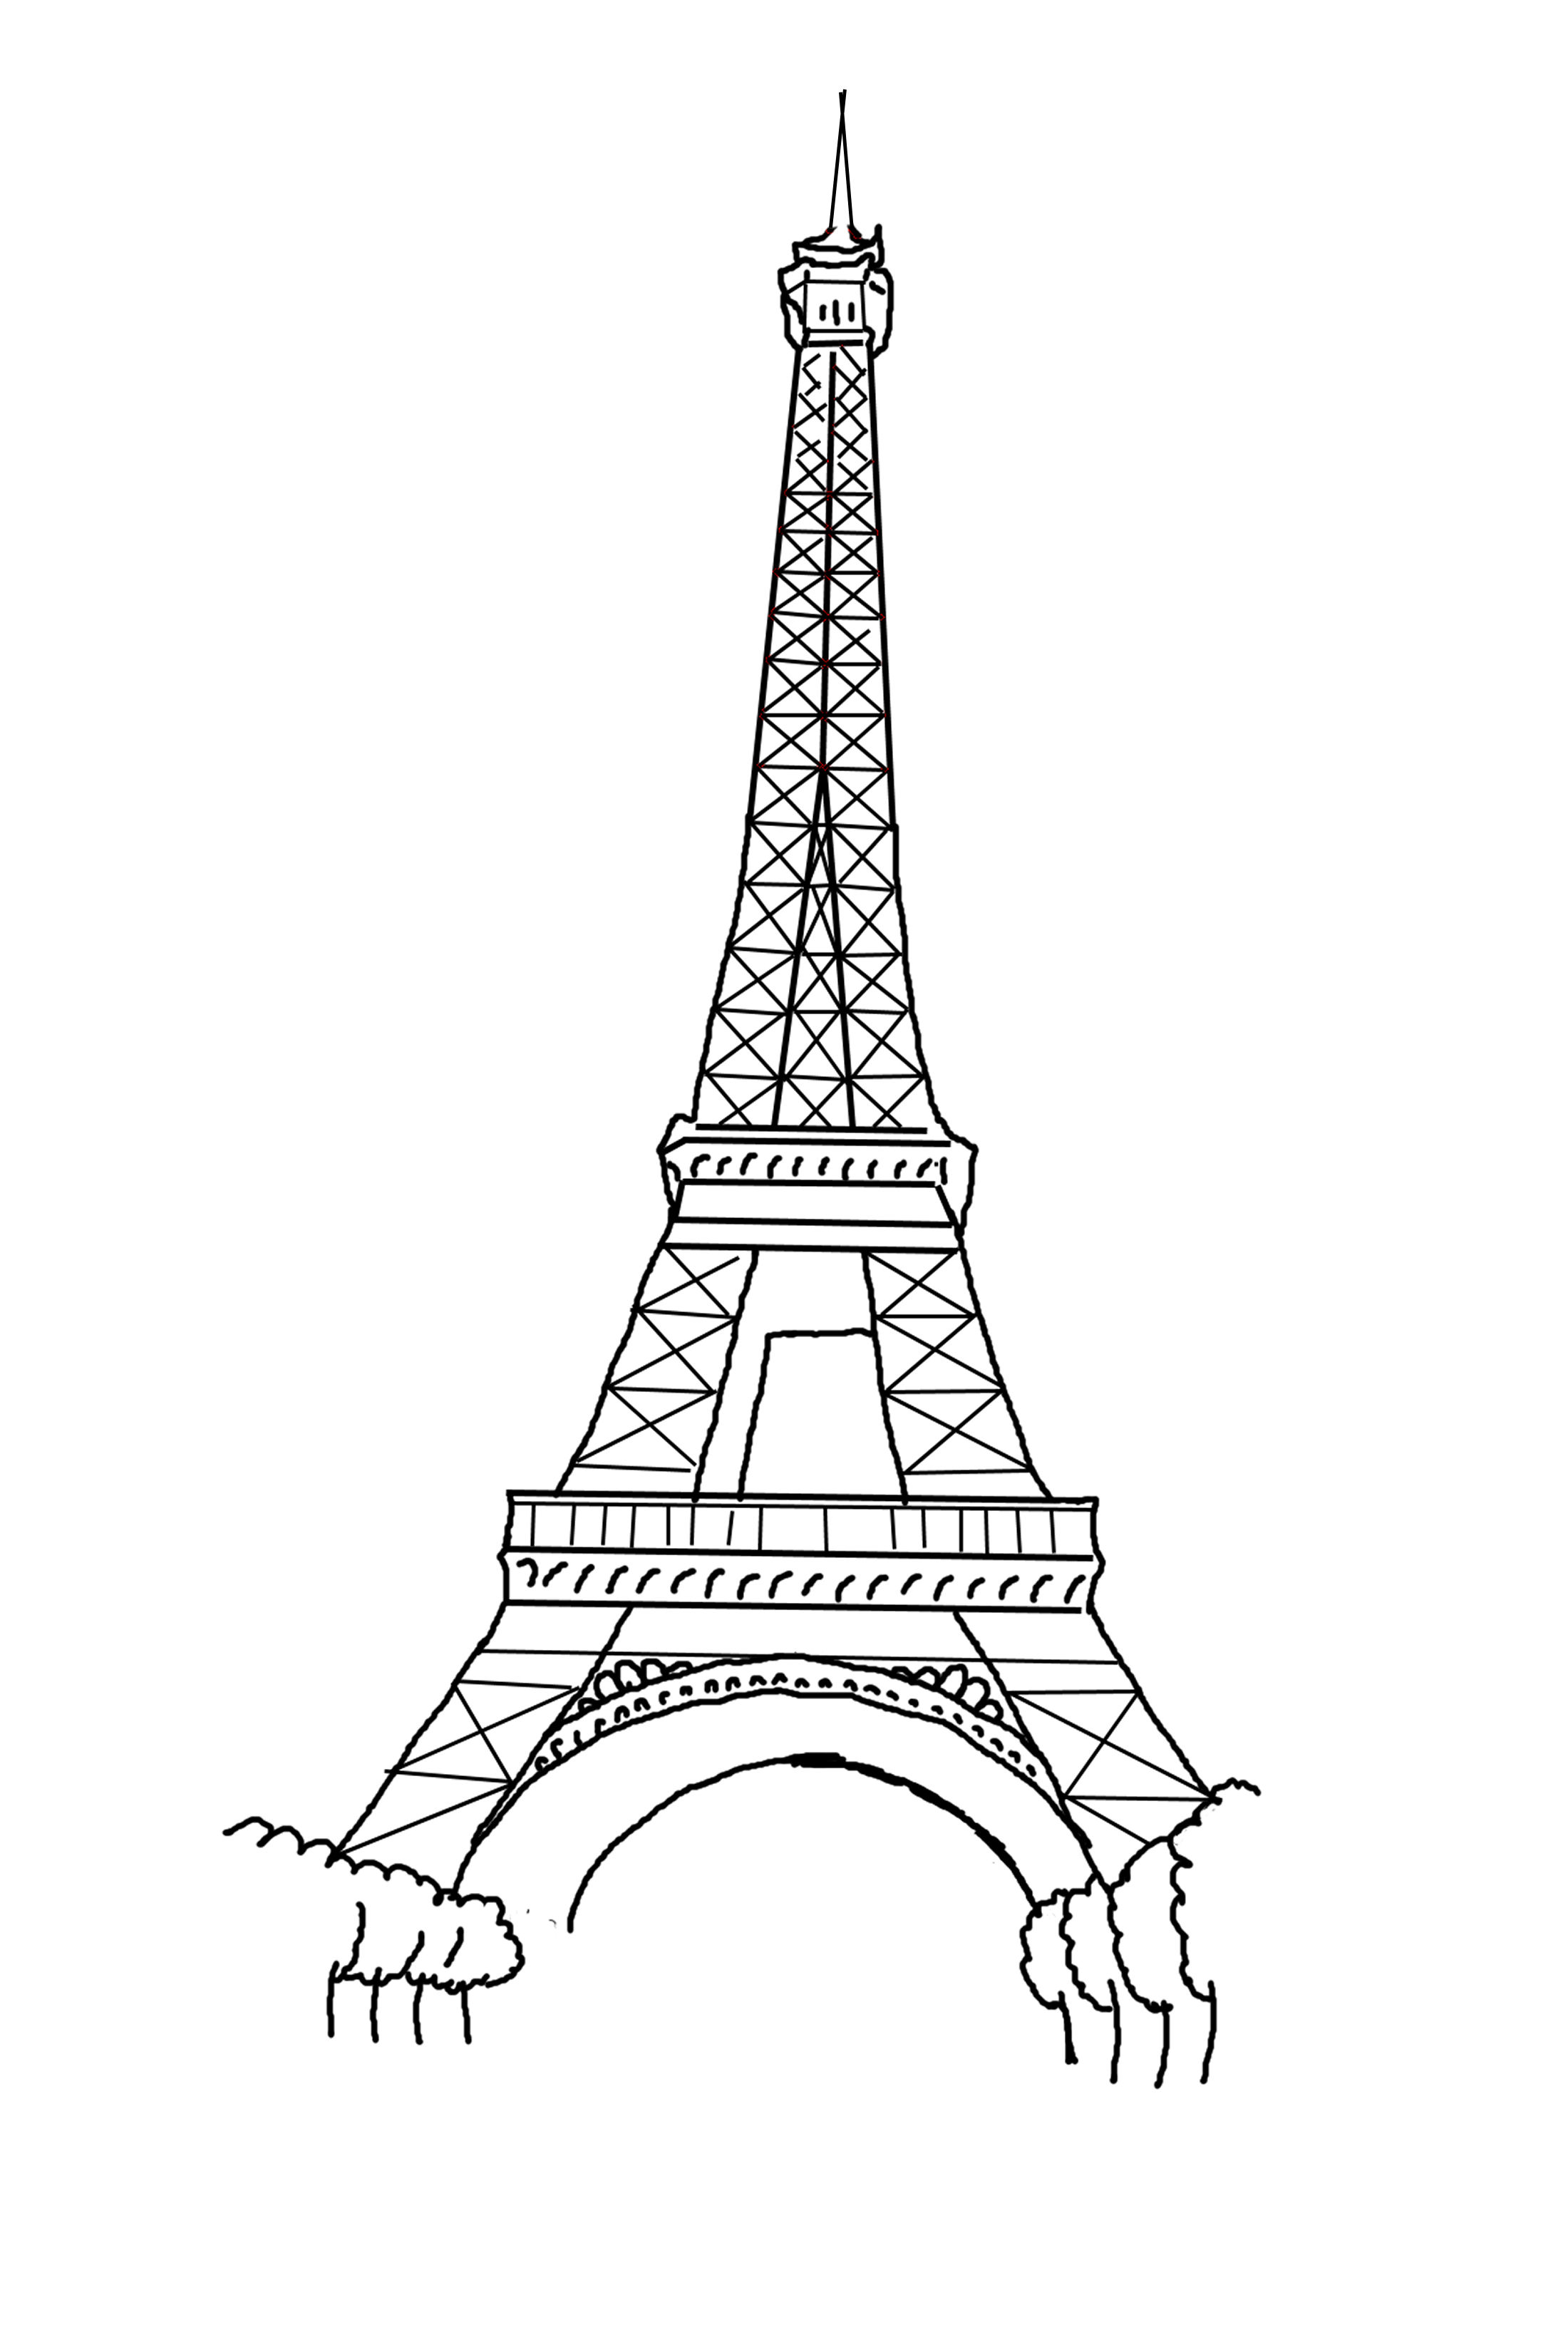 Coloring Pages Images Free Printable 7